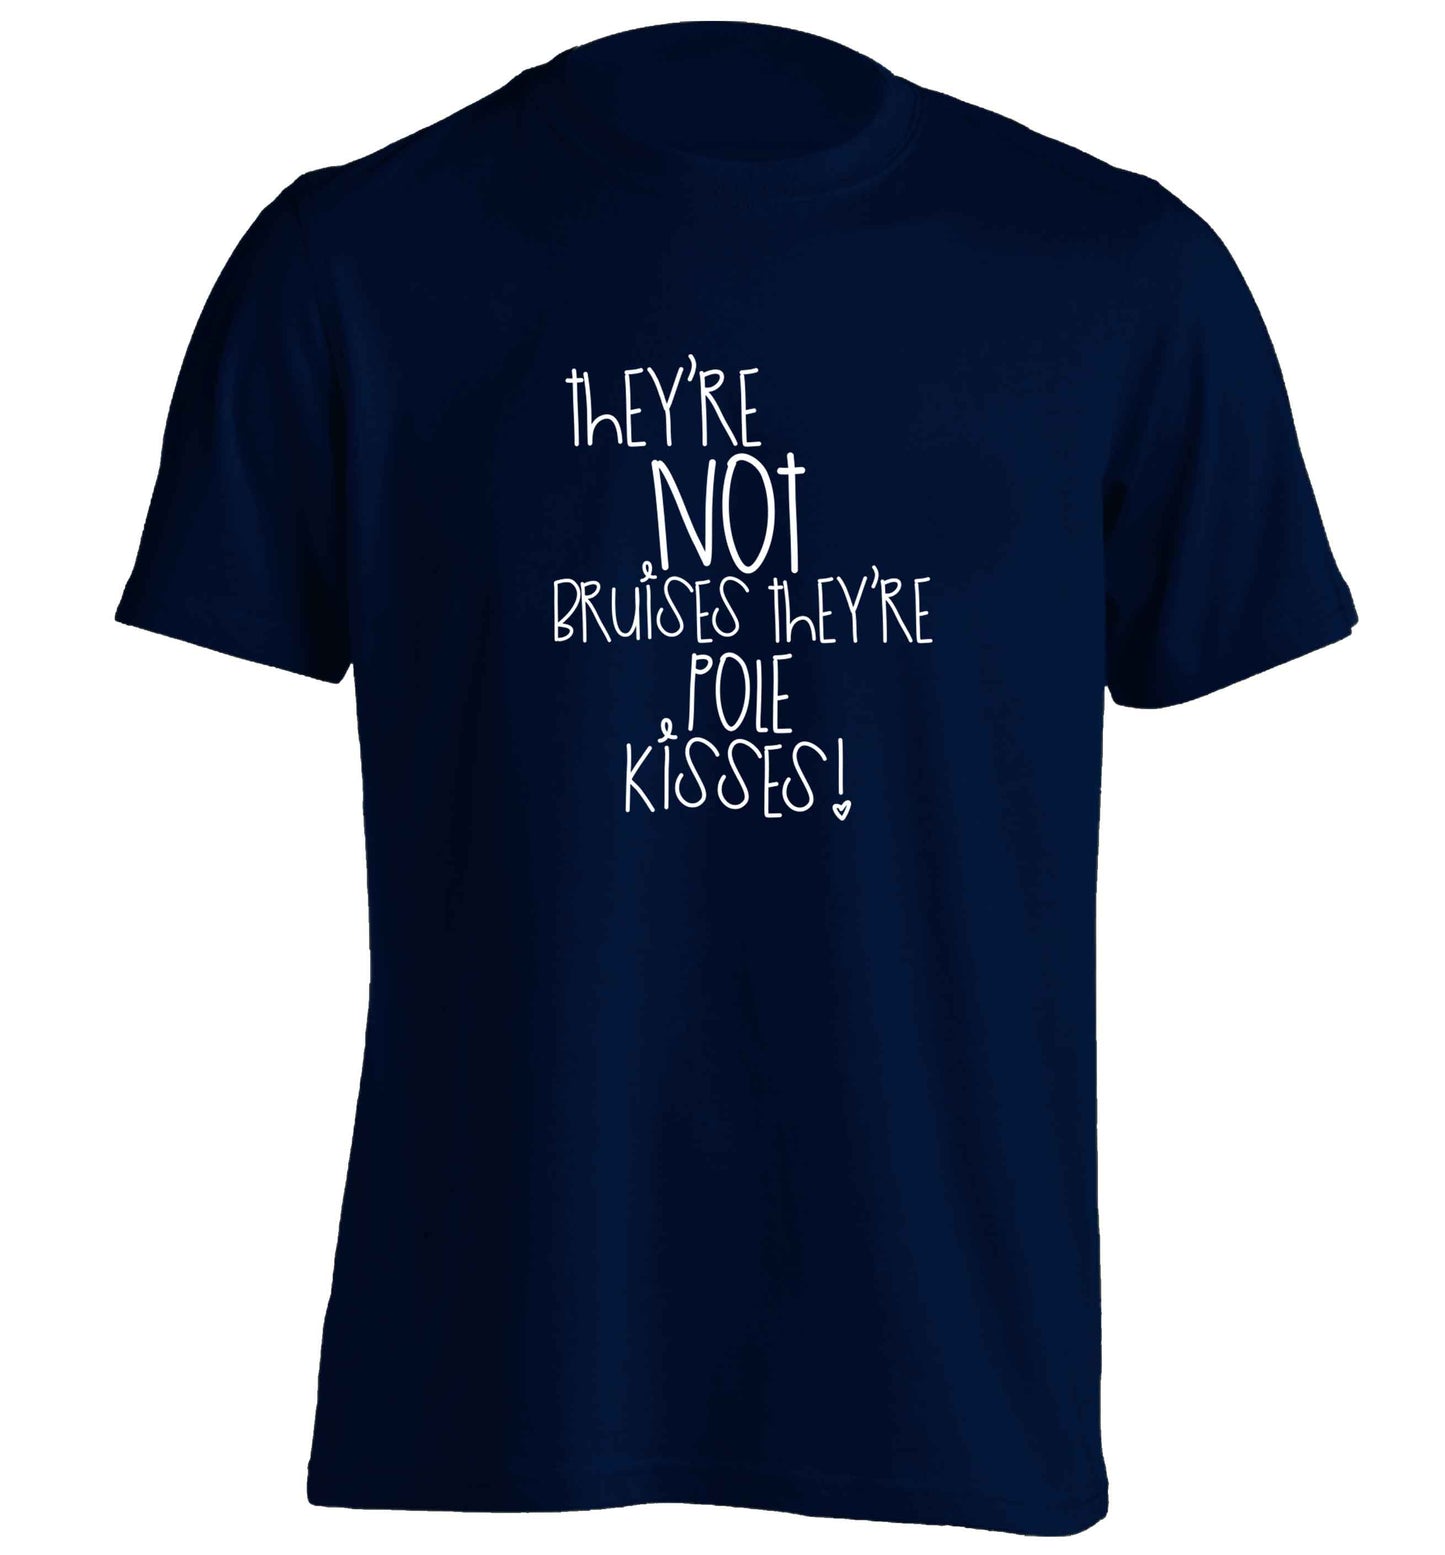 They're not bruises they're pole kisses adults unisex navy Tshirt 2XL